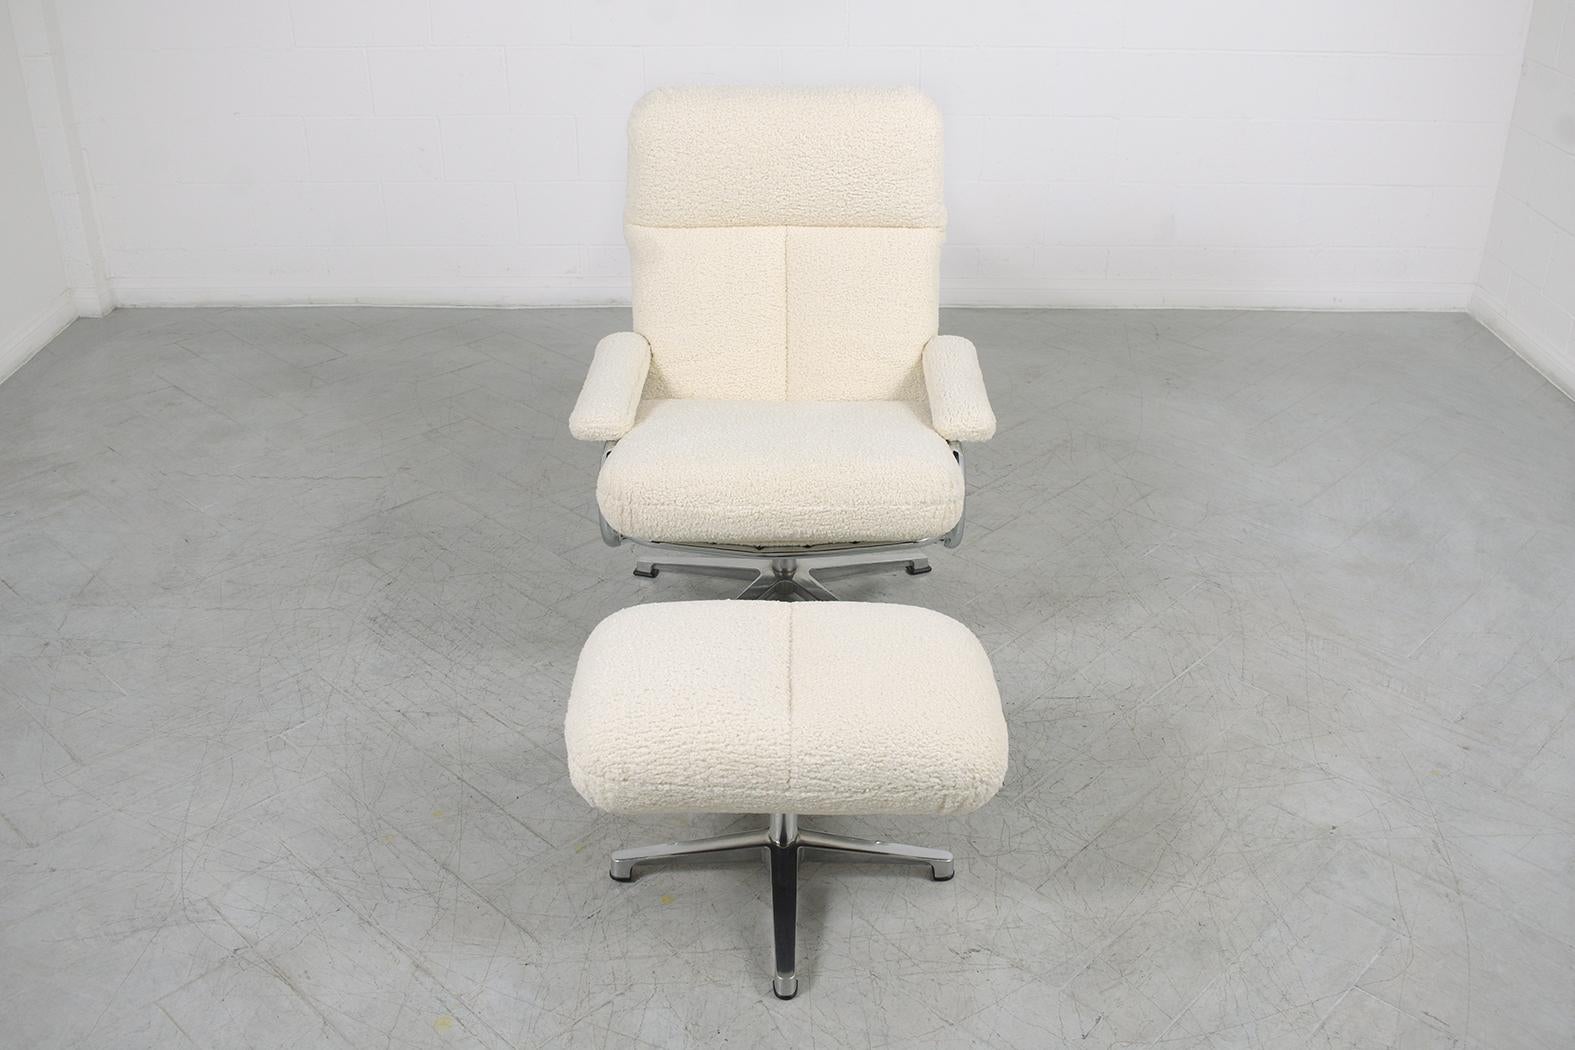 1970s Chrome-Plated Recliner Chair and Ottoman Set with Bouclé Upholstery For Sale 1